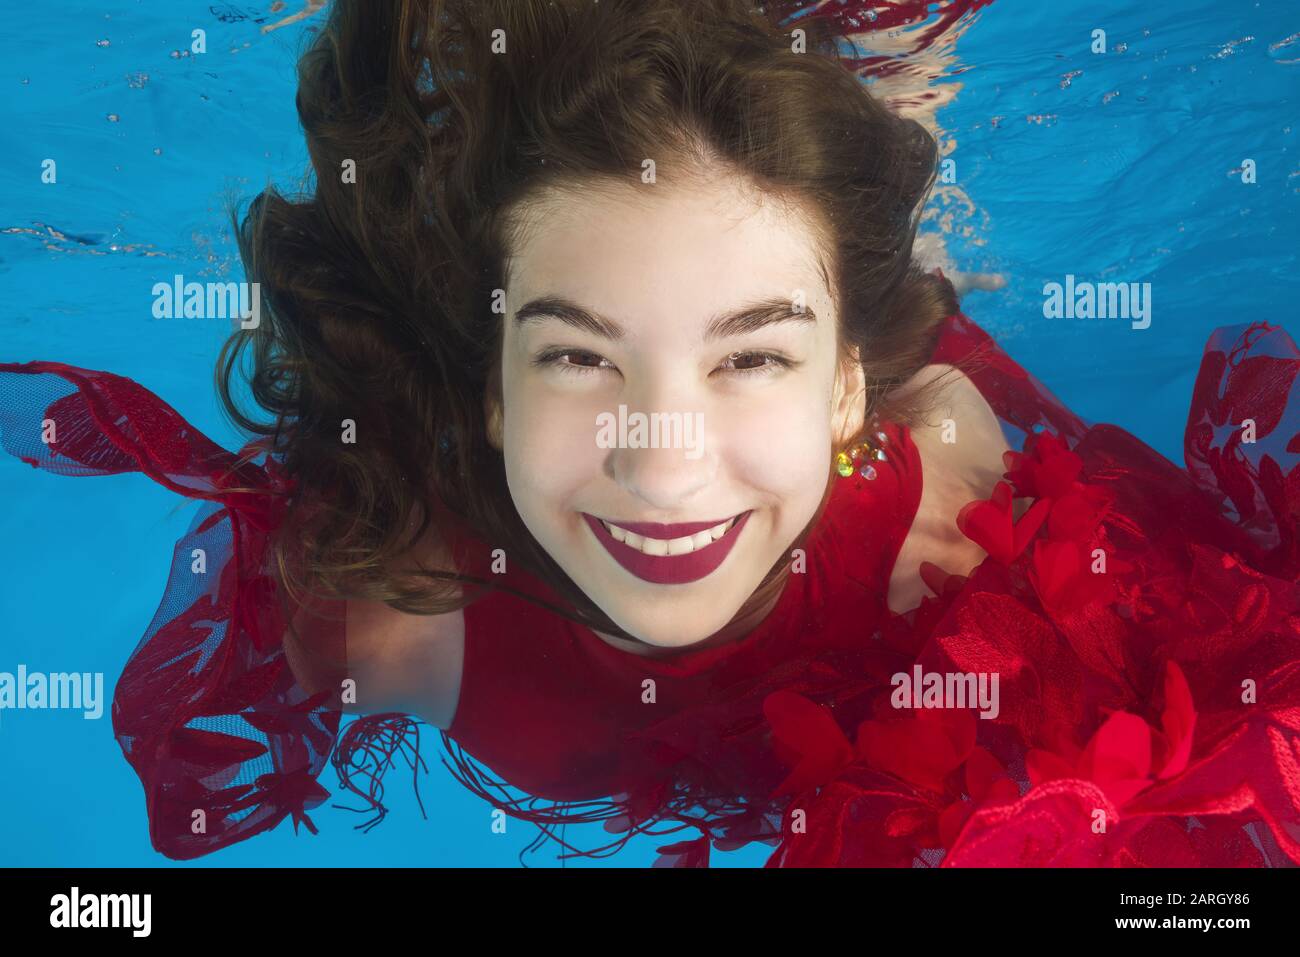 Portrait of young beautiful girl in a red dress posing underwater in the pool Stock Photo